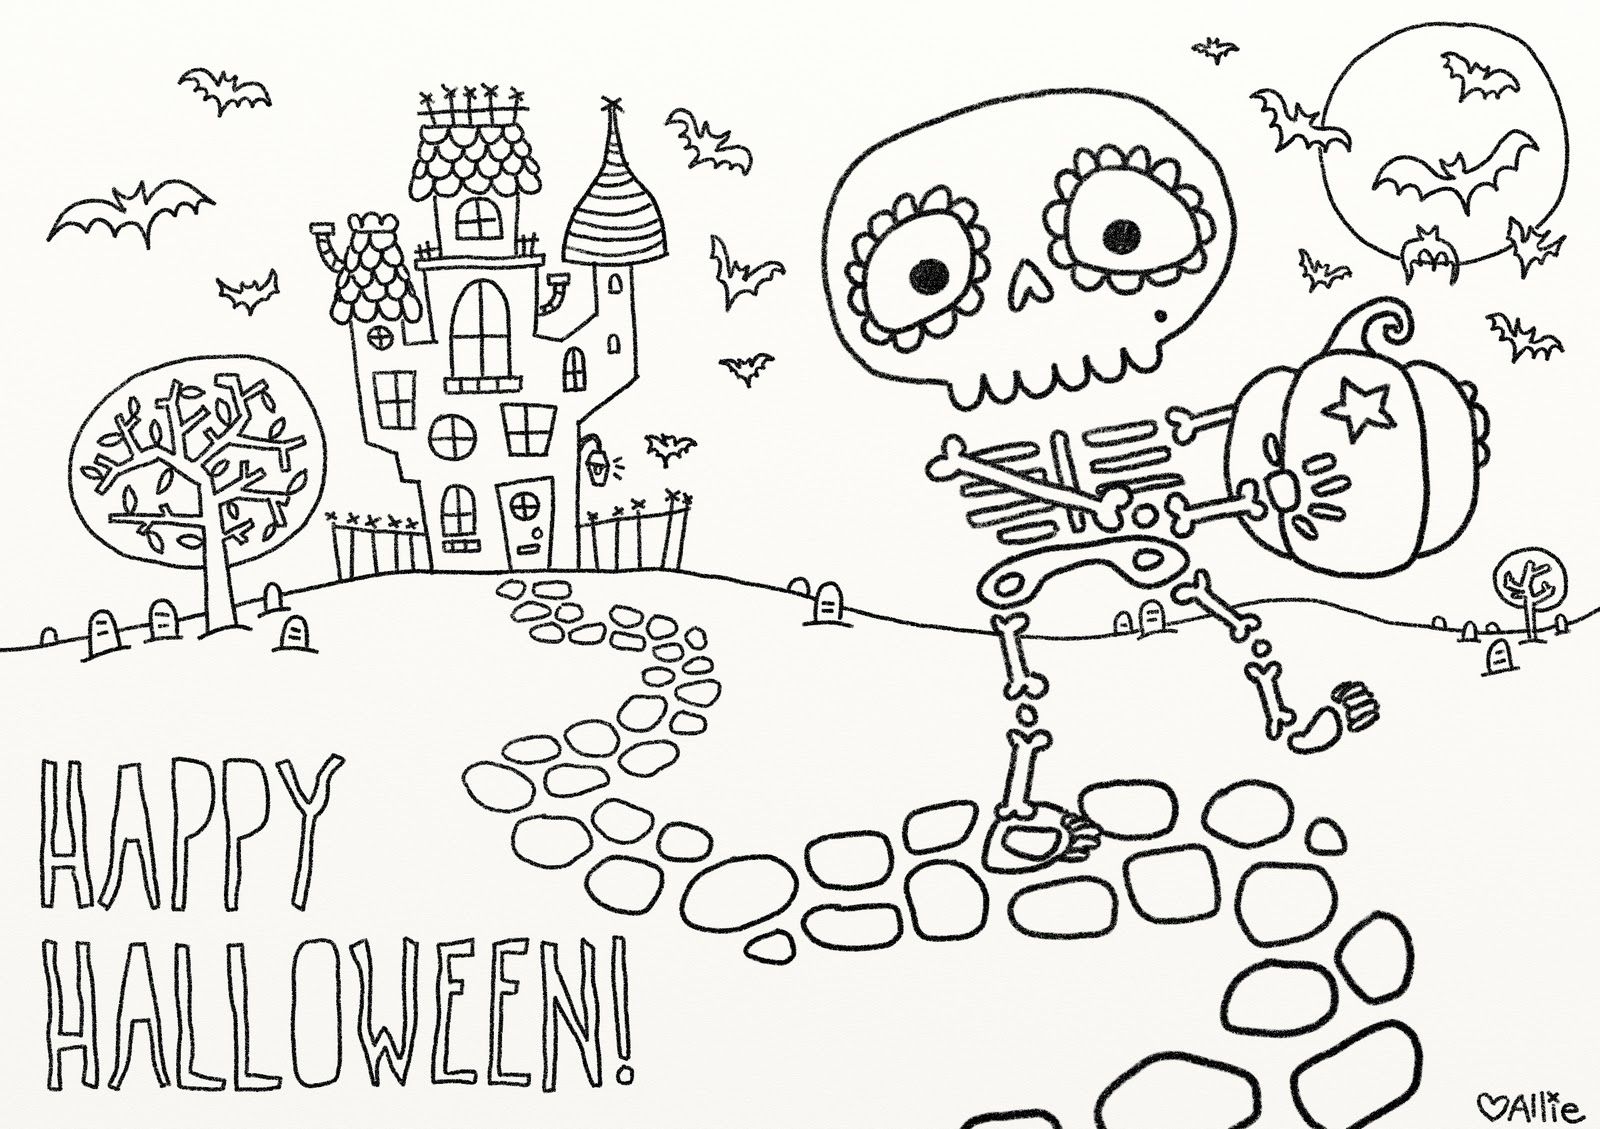 Printable Scary Halloween Coloring Pages - Colorine.net | #24455